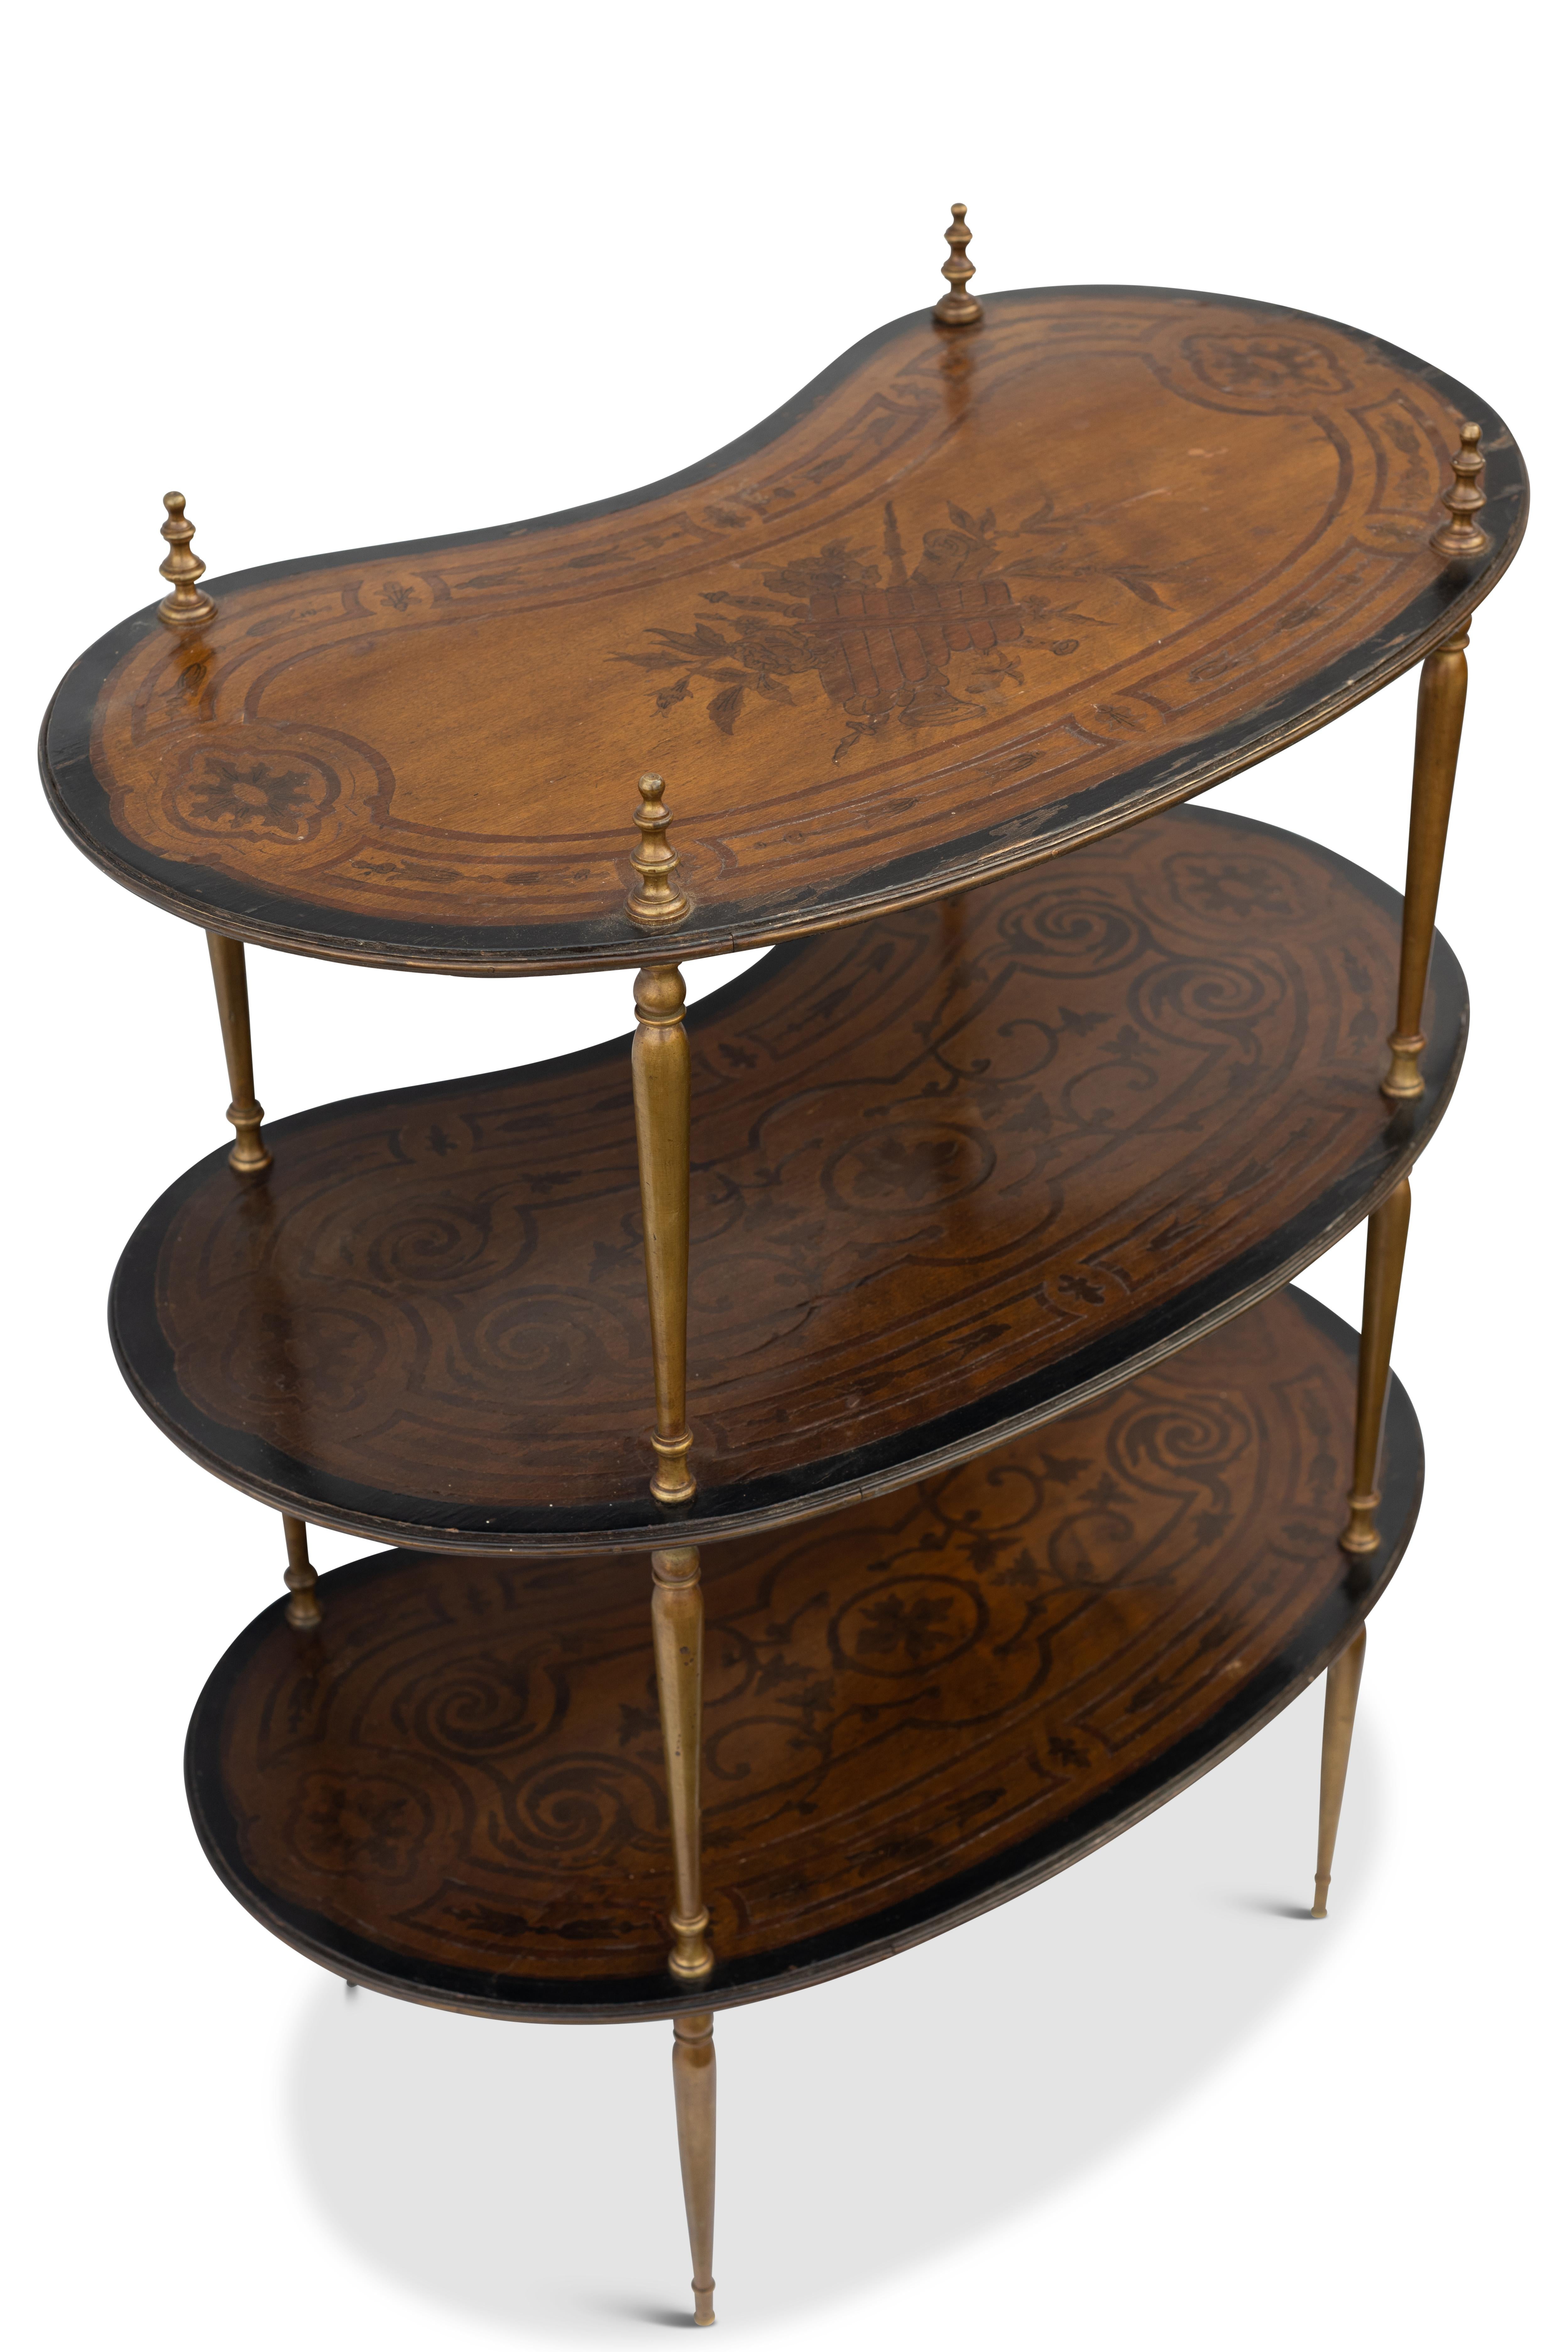 Italian Victorian Continental Three-Tier Kidney Shaped Brass & Marquetry Étagére 1880's For Sale